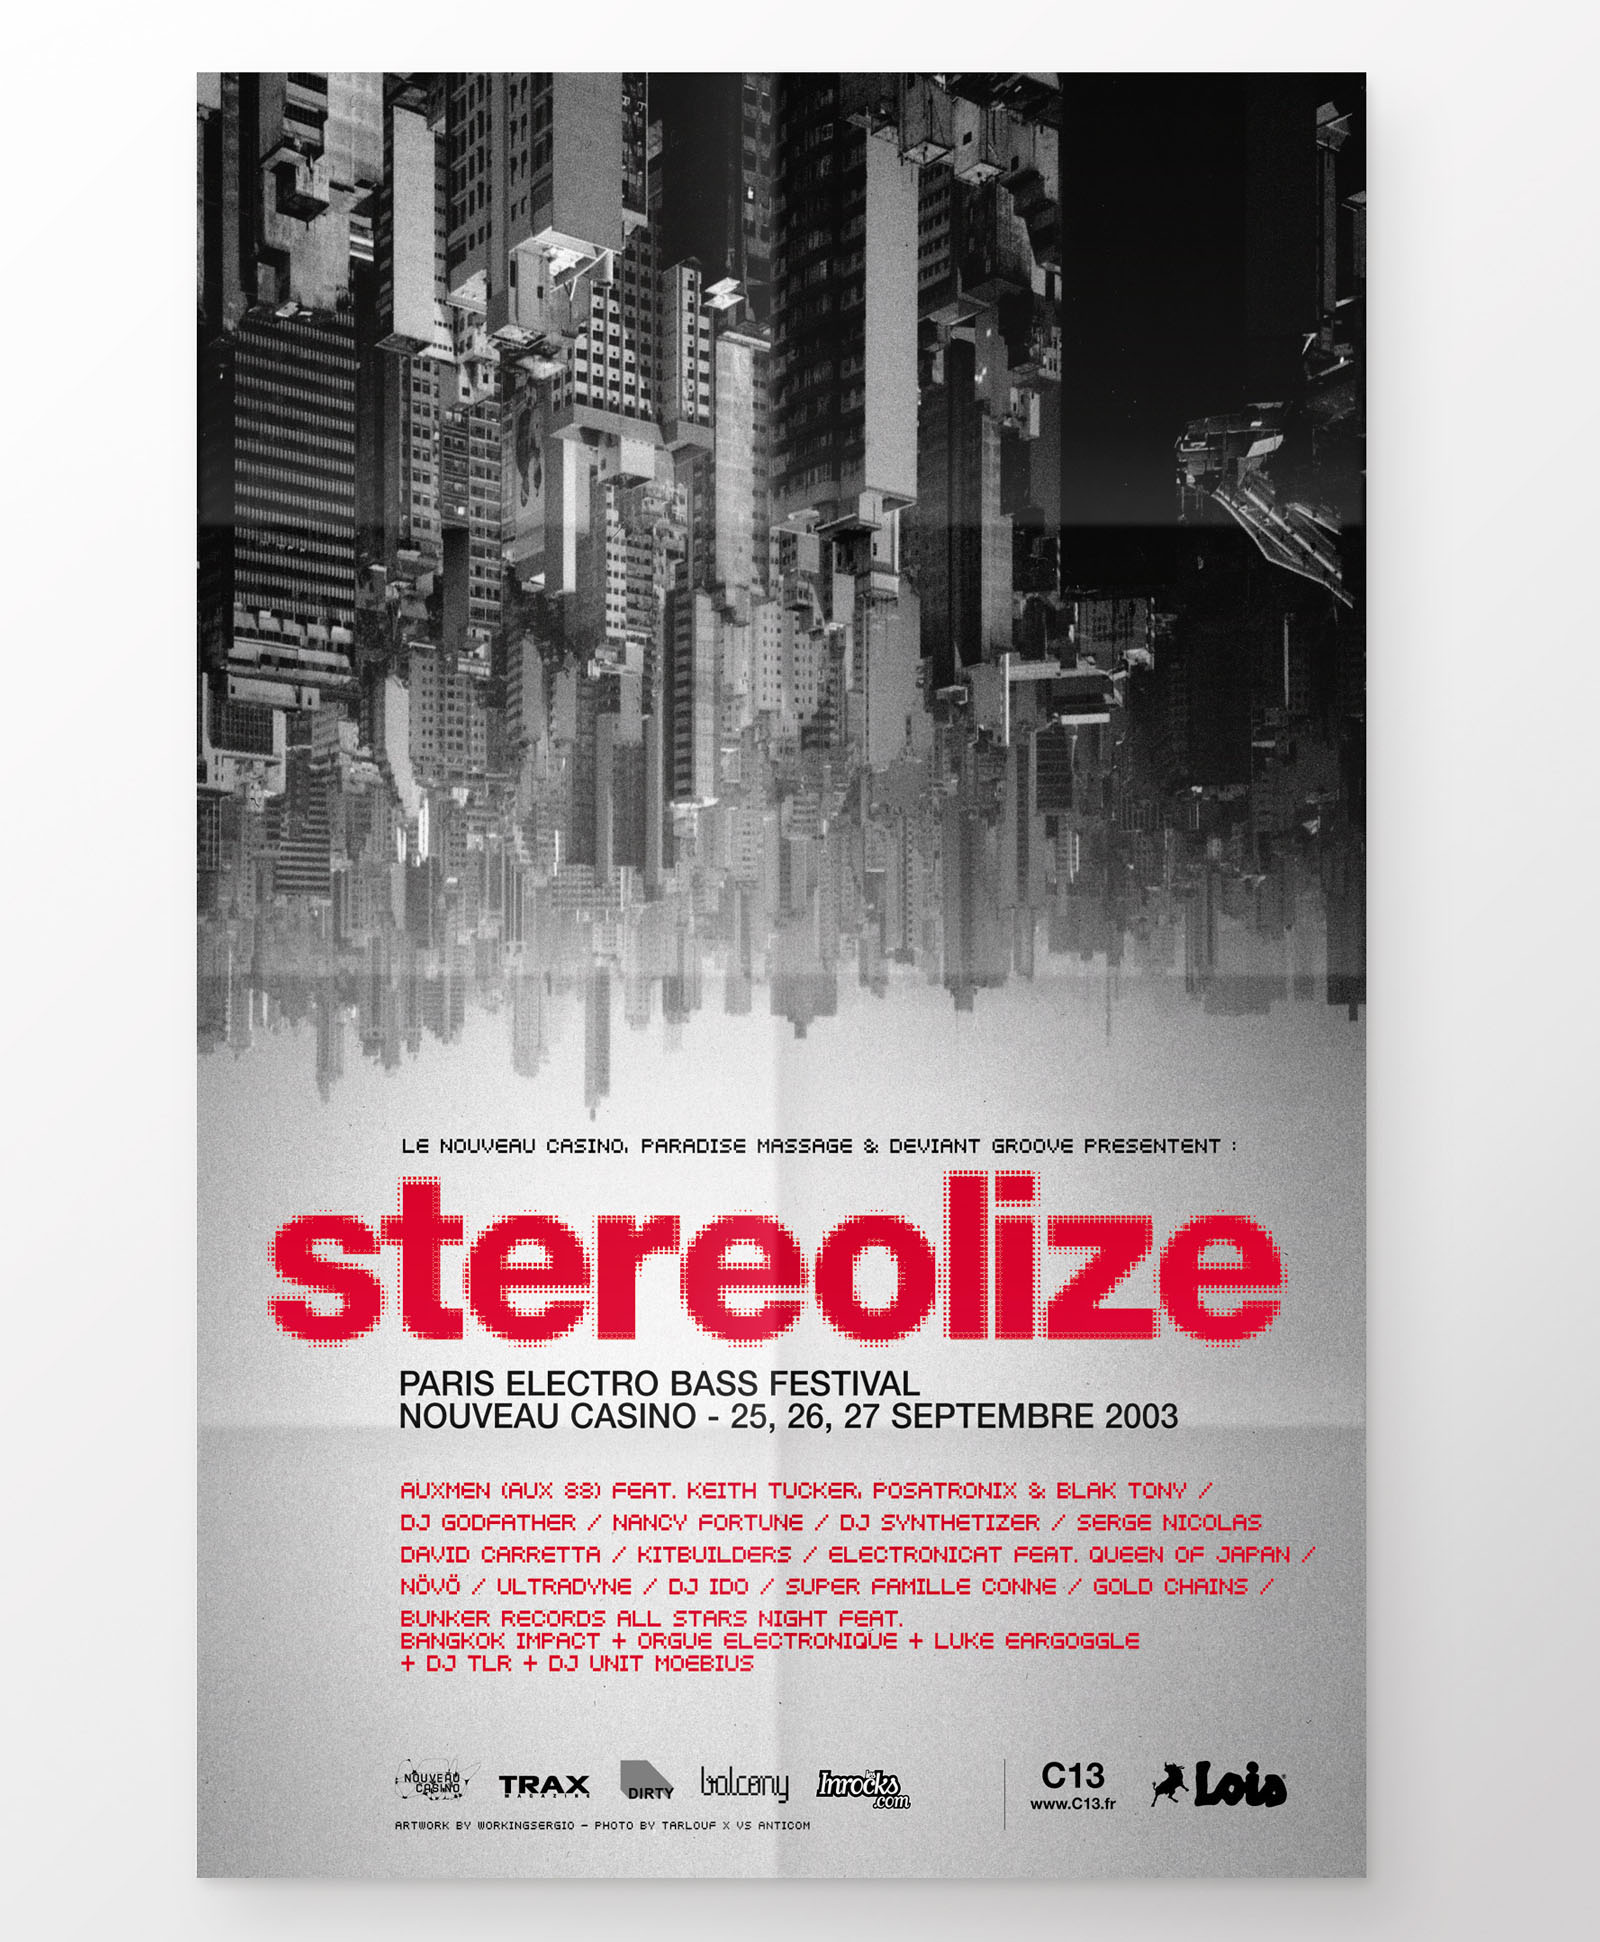 stereolize